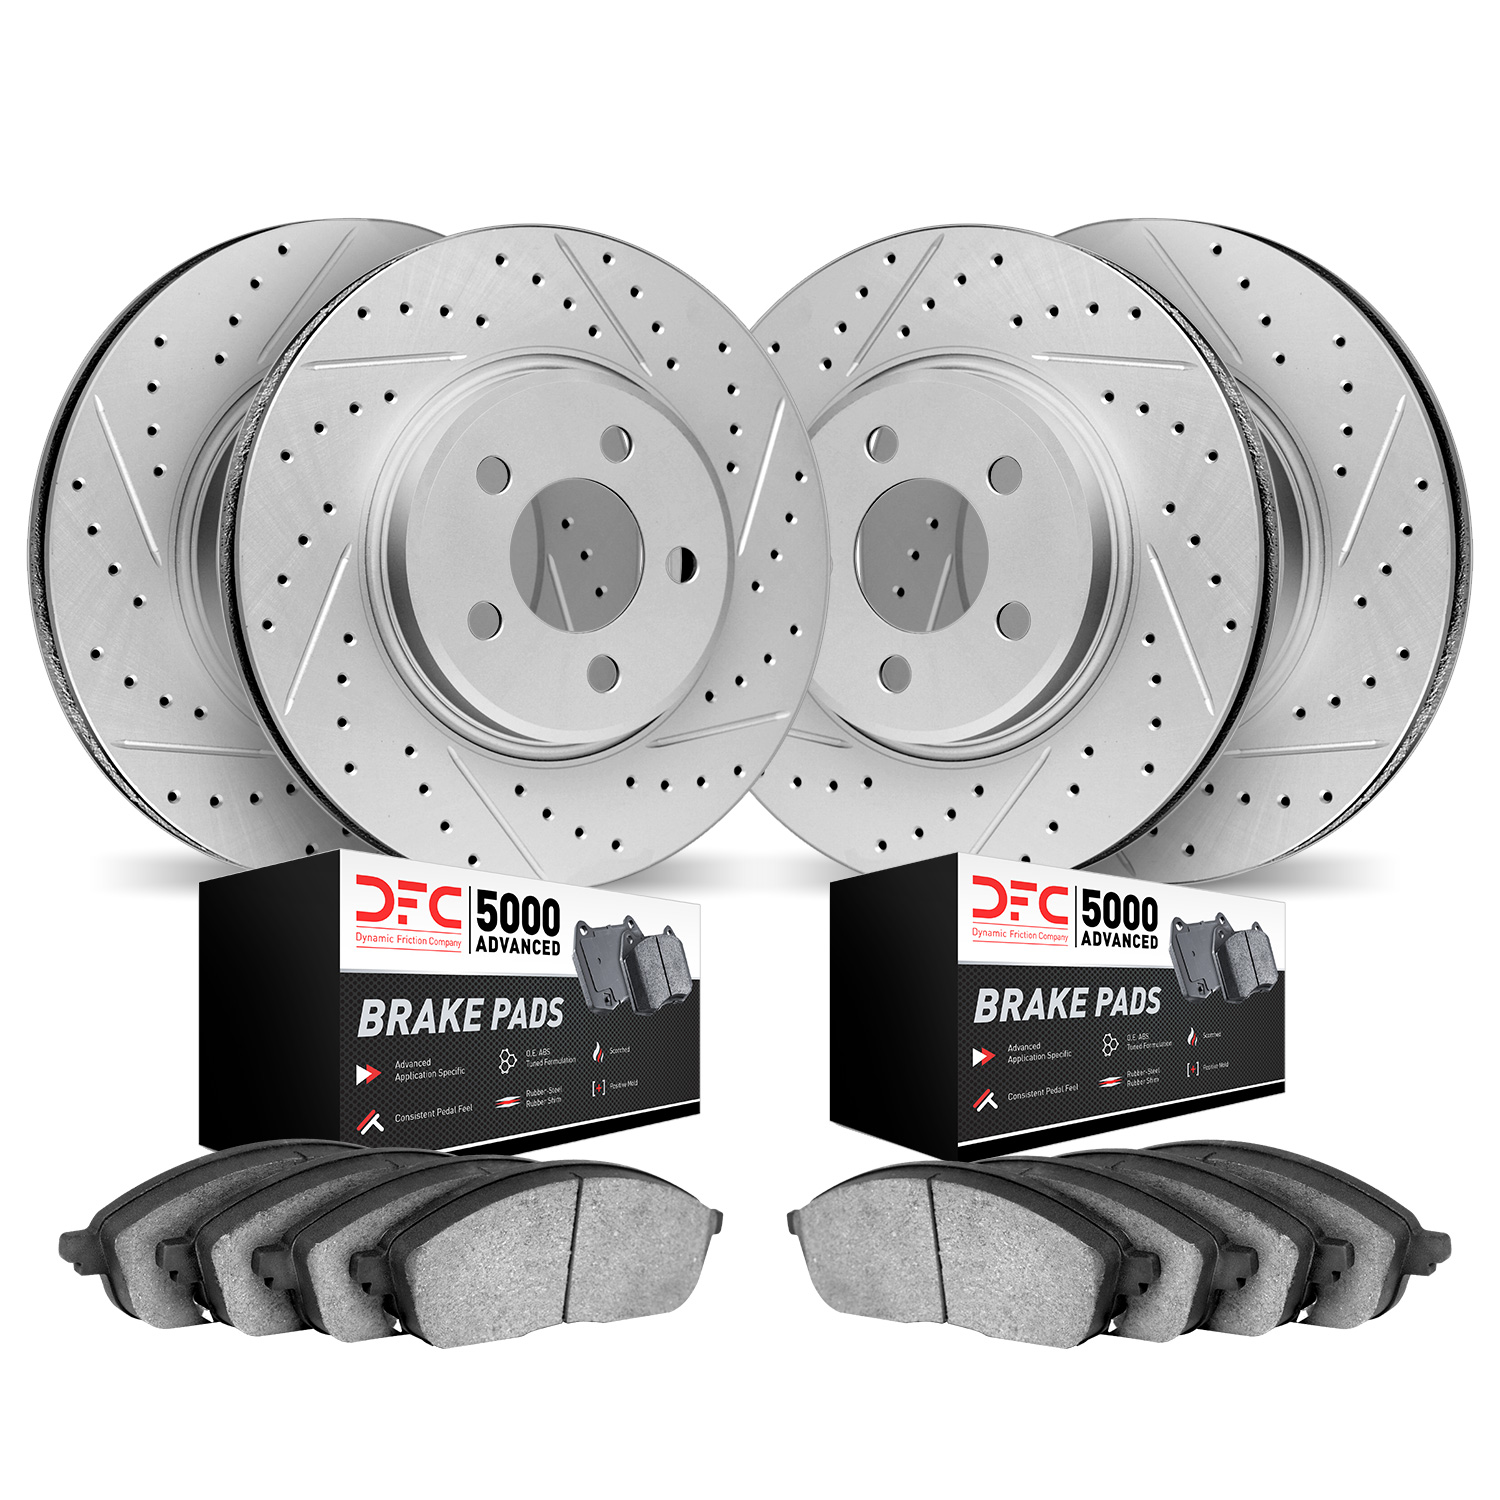 2504-11009 Geoperformance Drilled/Slotted Rotors w/5000 Advanced Brake Pads Kit, 2005-2007 Land Rover, Position: Front and Rear